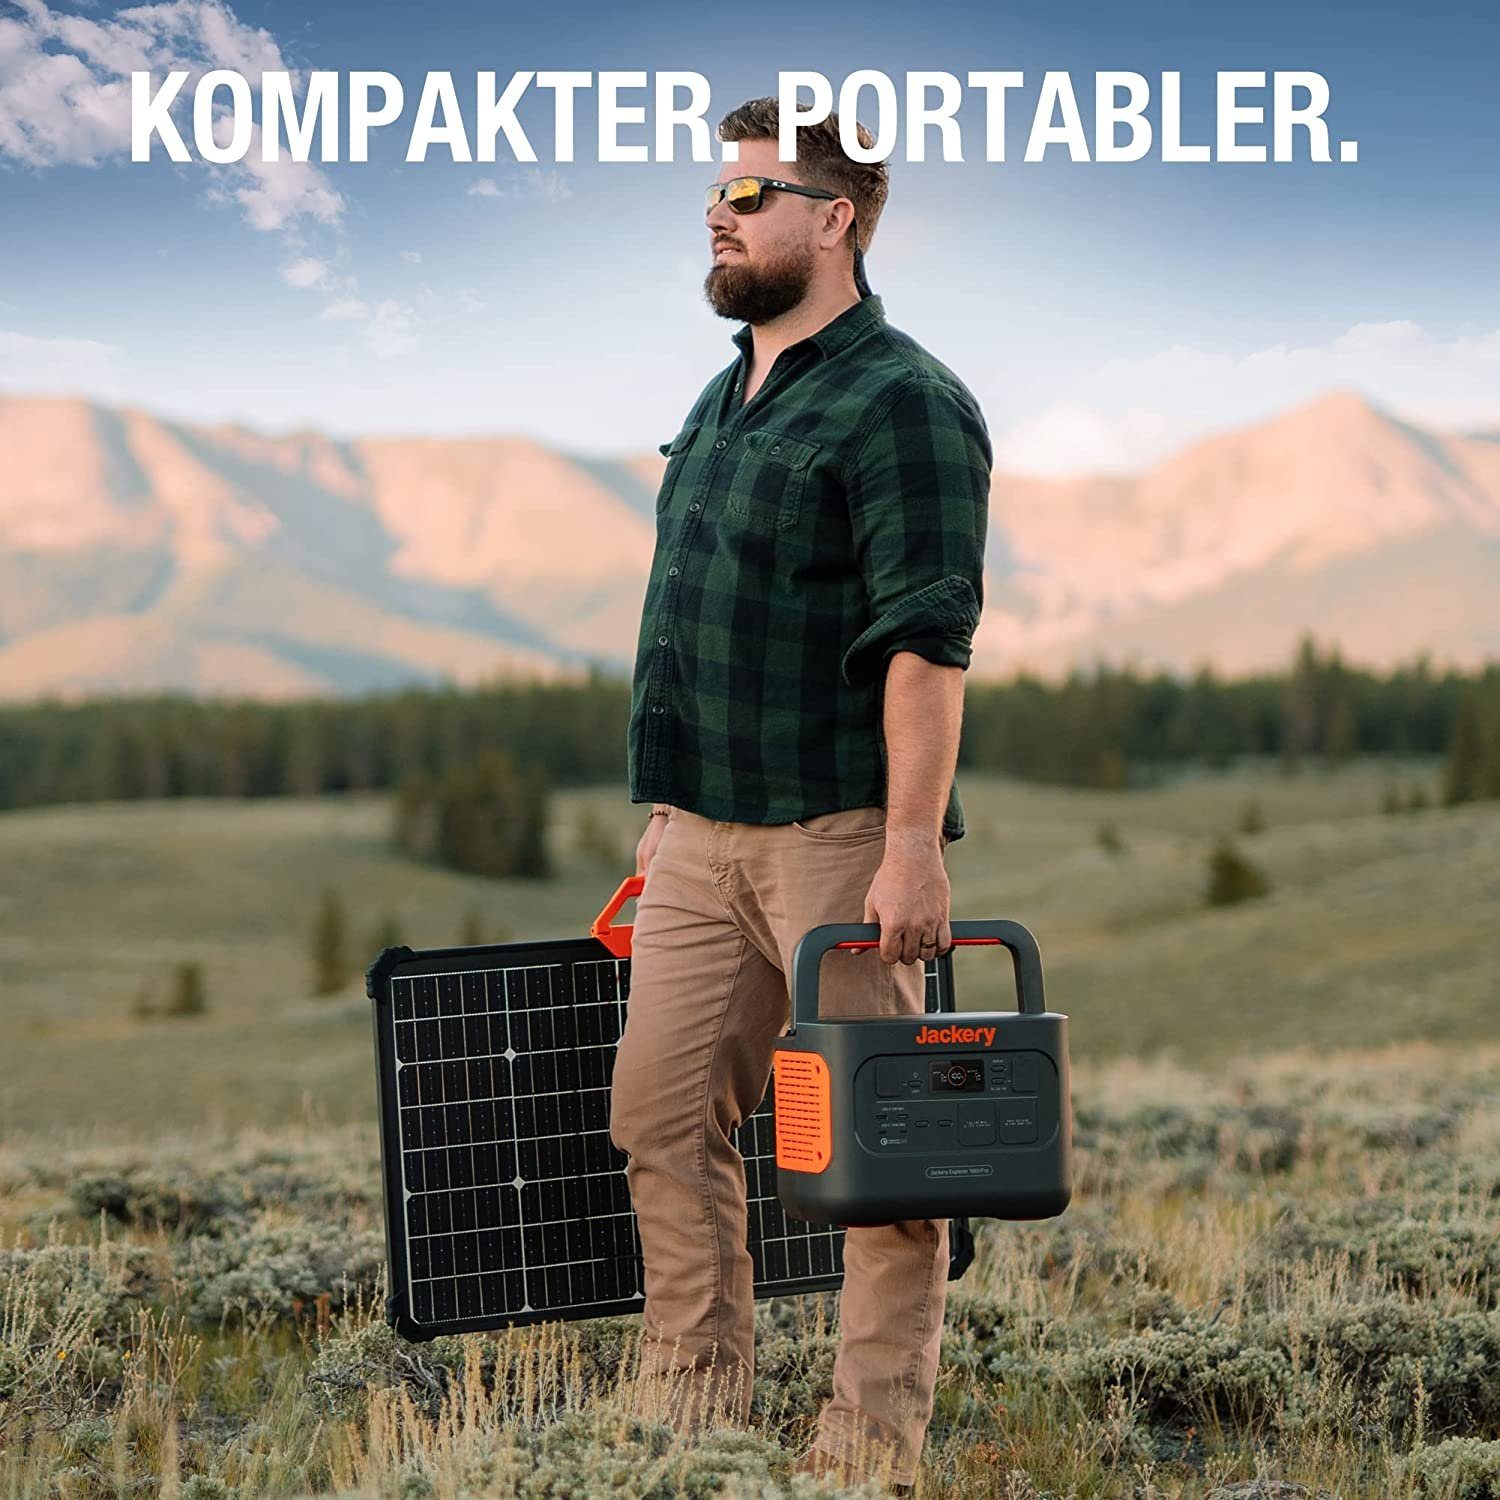 Solarpanel), Outdoor 160W Notfälle Camping Pro, (3-tlg., Generator kW, Stromgenerator Solarpanel, 2,00 Solar mit tragbare 1000 2x80W 1002 Wh Powerstation für Jackery 1000Pro mit Solargenerator in